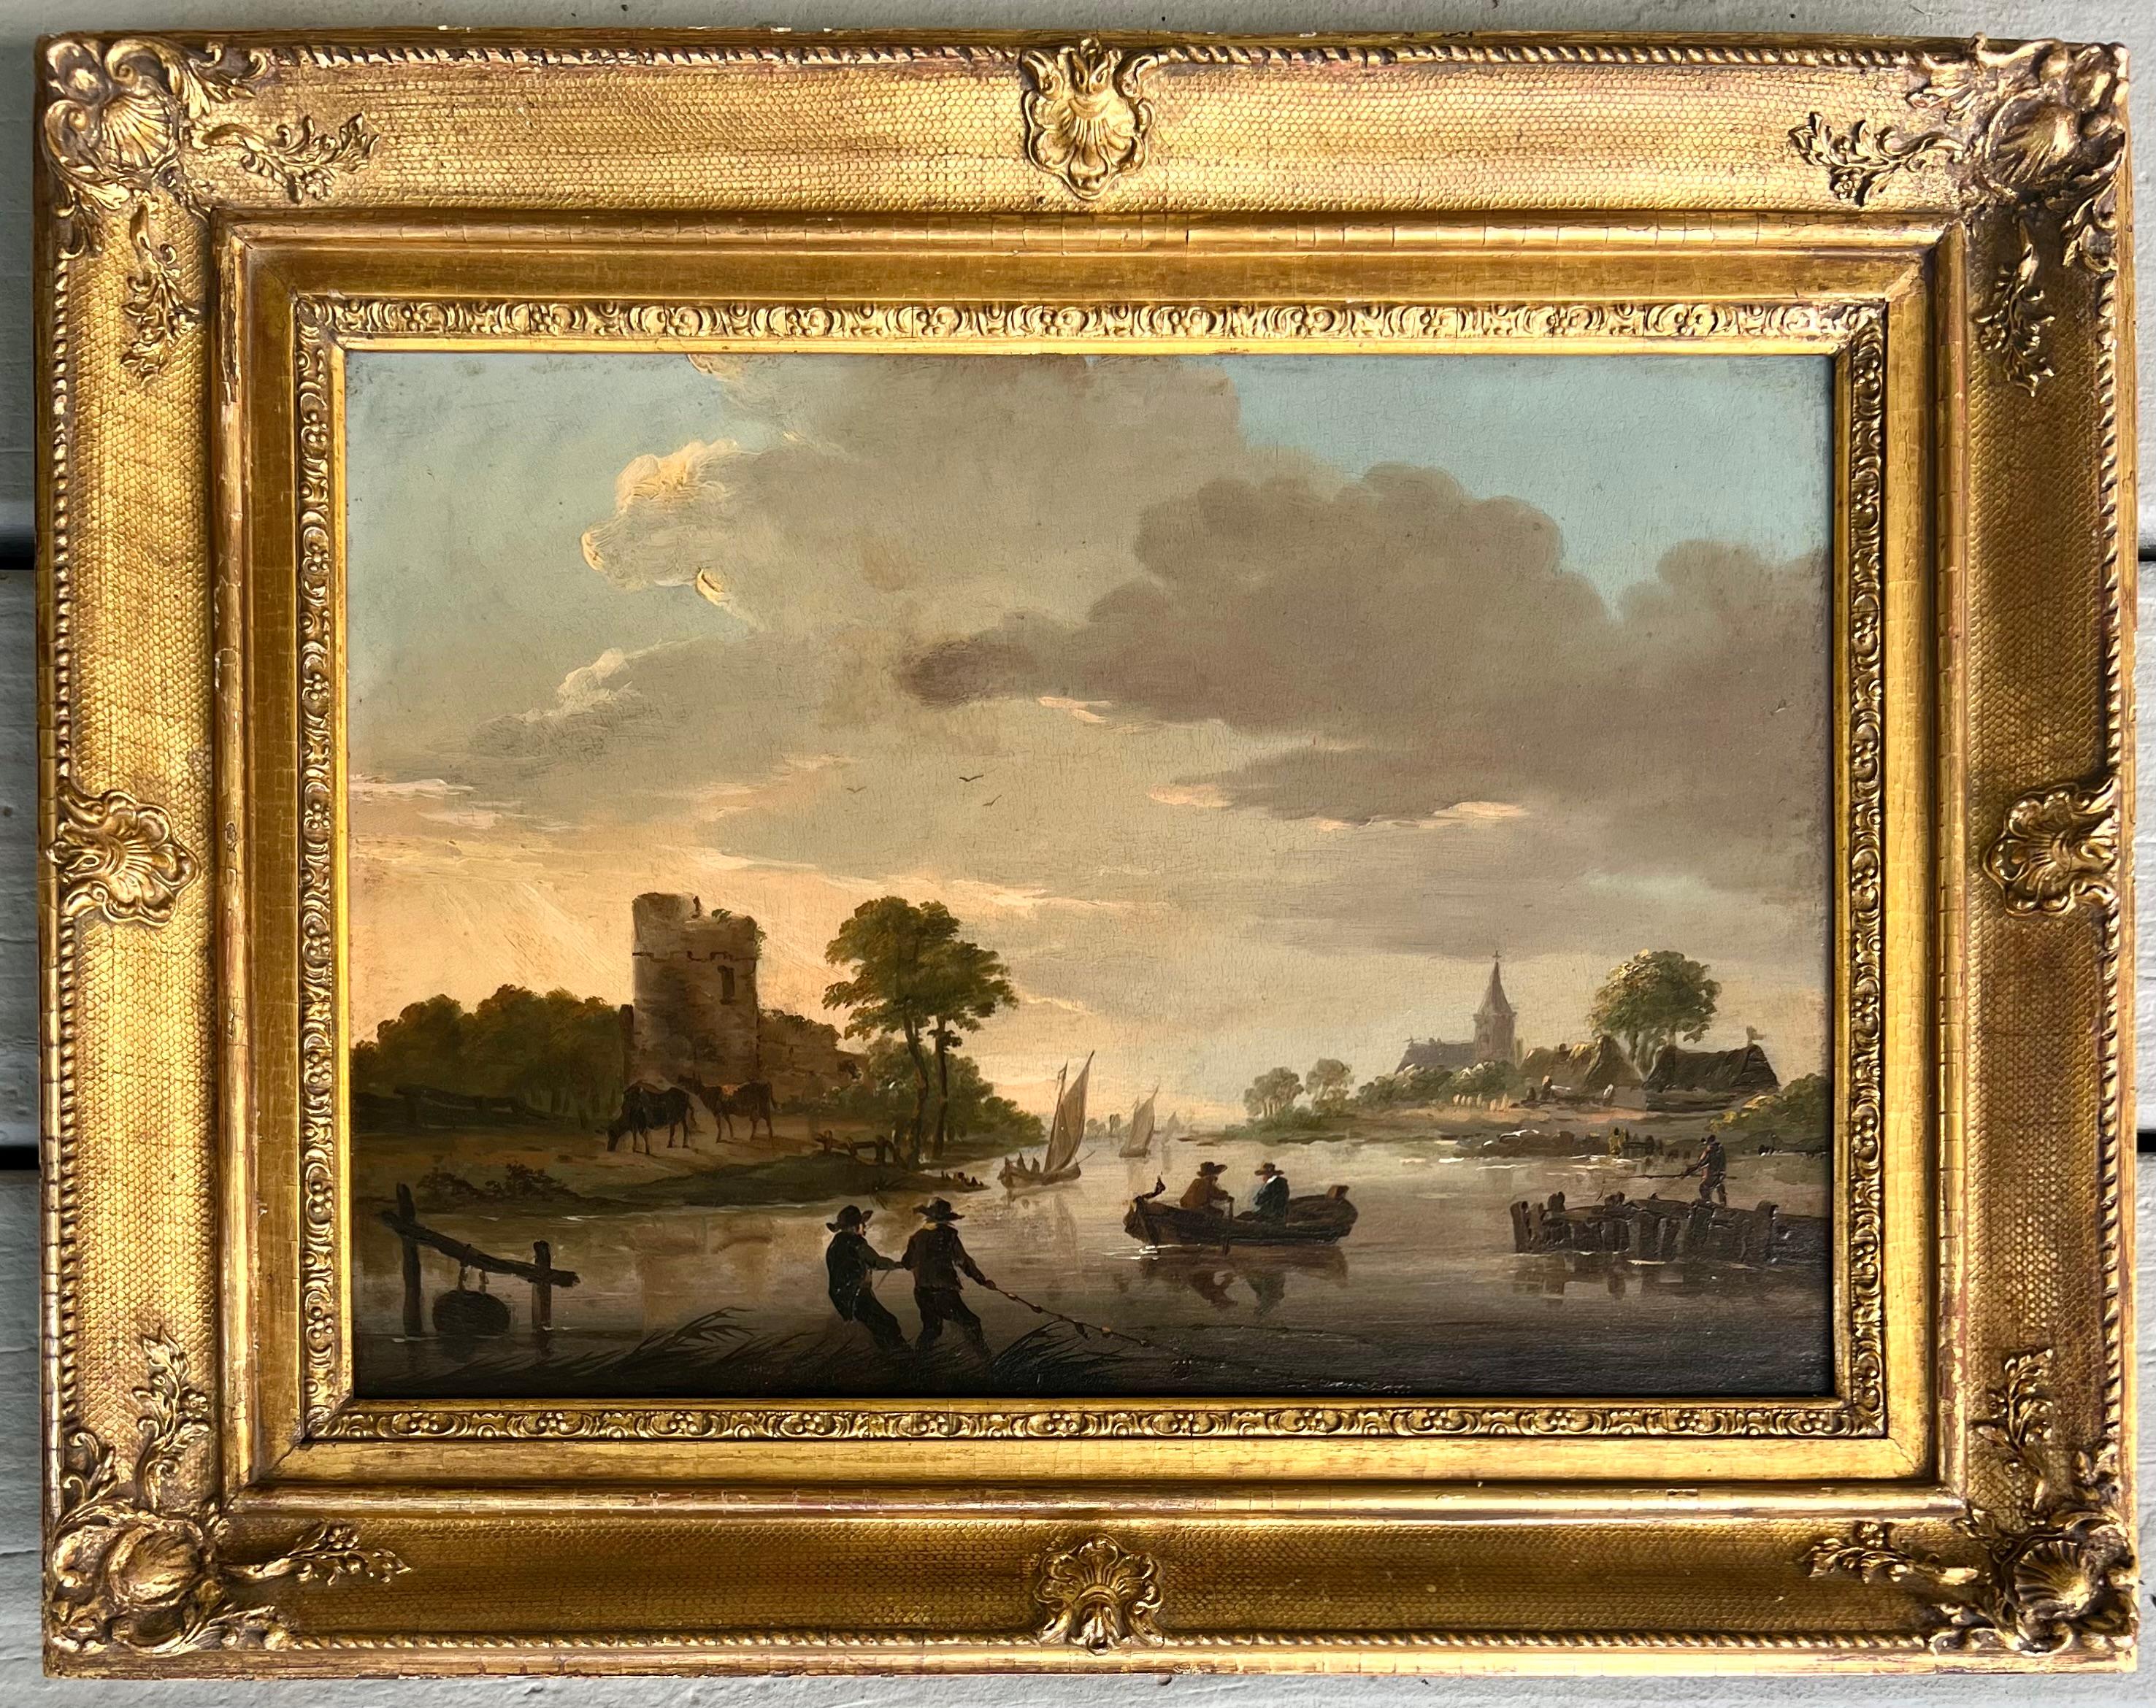 Oil on board old master painting of a village on the river at sunset.  I cannot find a signature.  The painting dates to the 18th century and is most likely Dutch or Flemish.  It presents beautifully in its gilt frame and has a very nice luminous